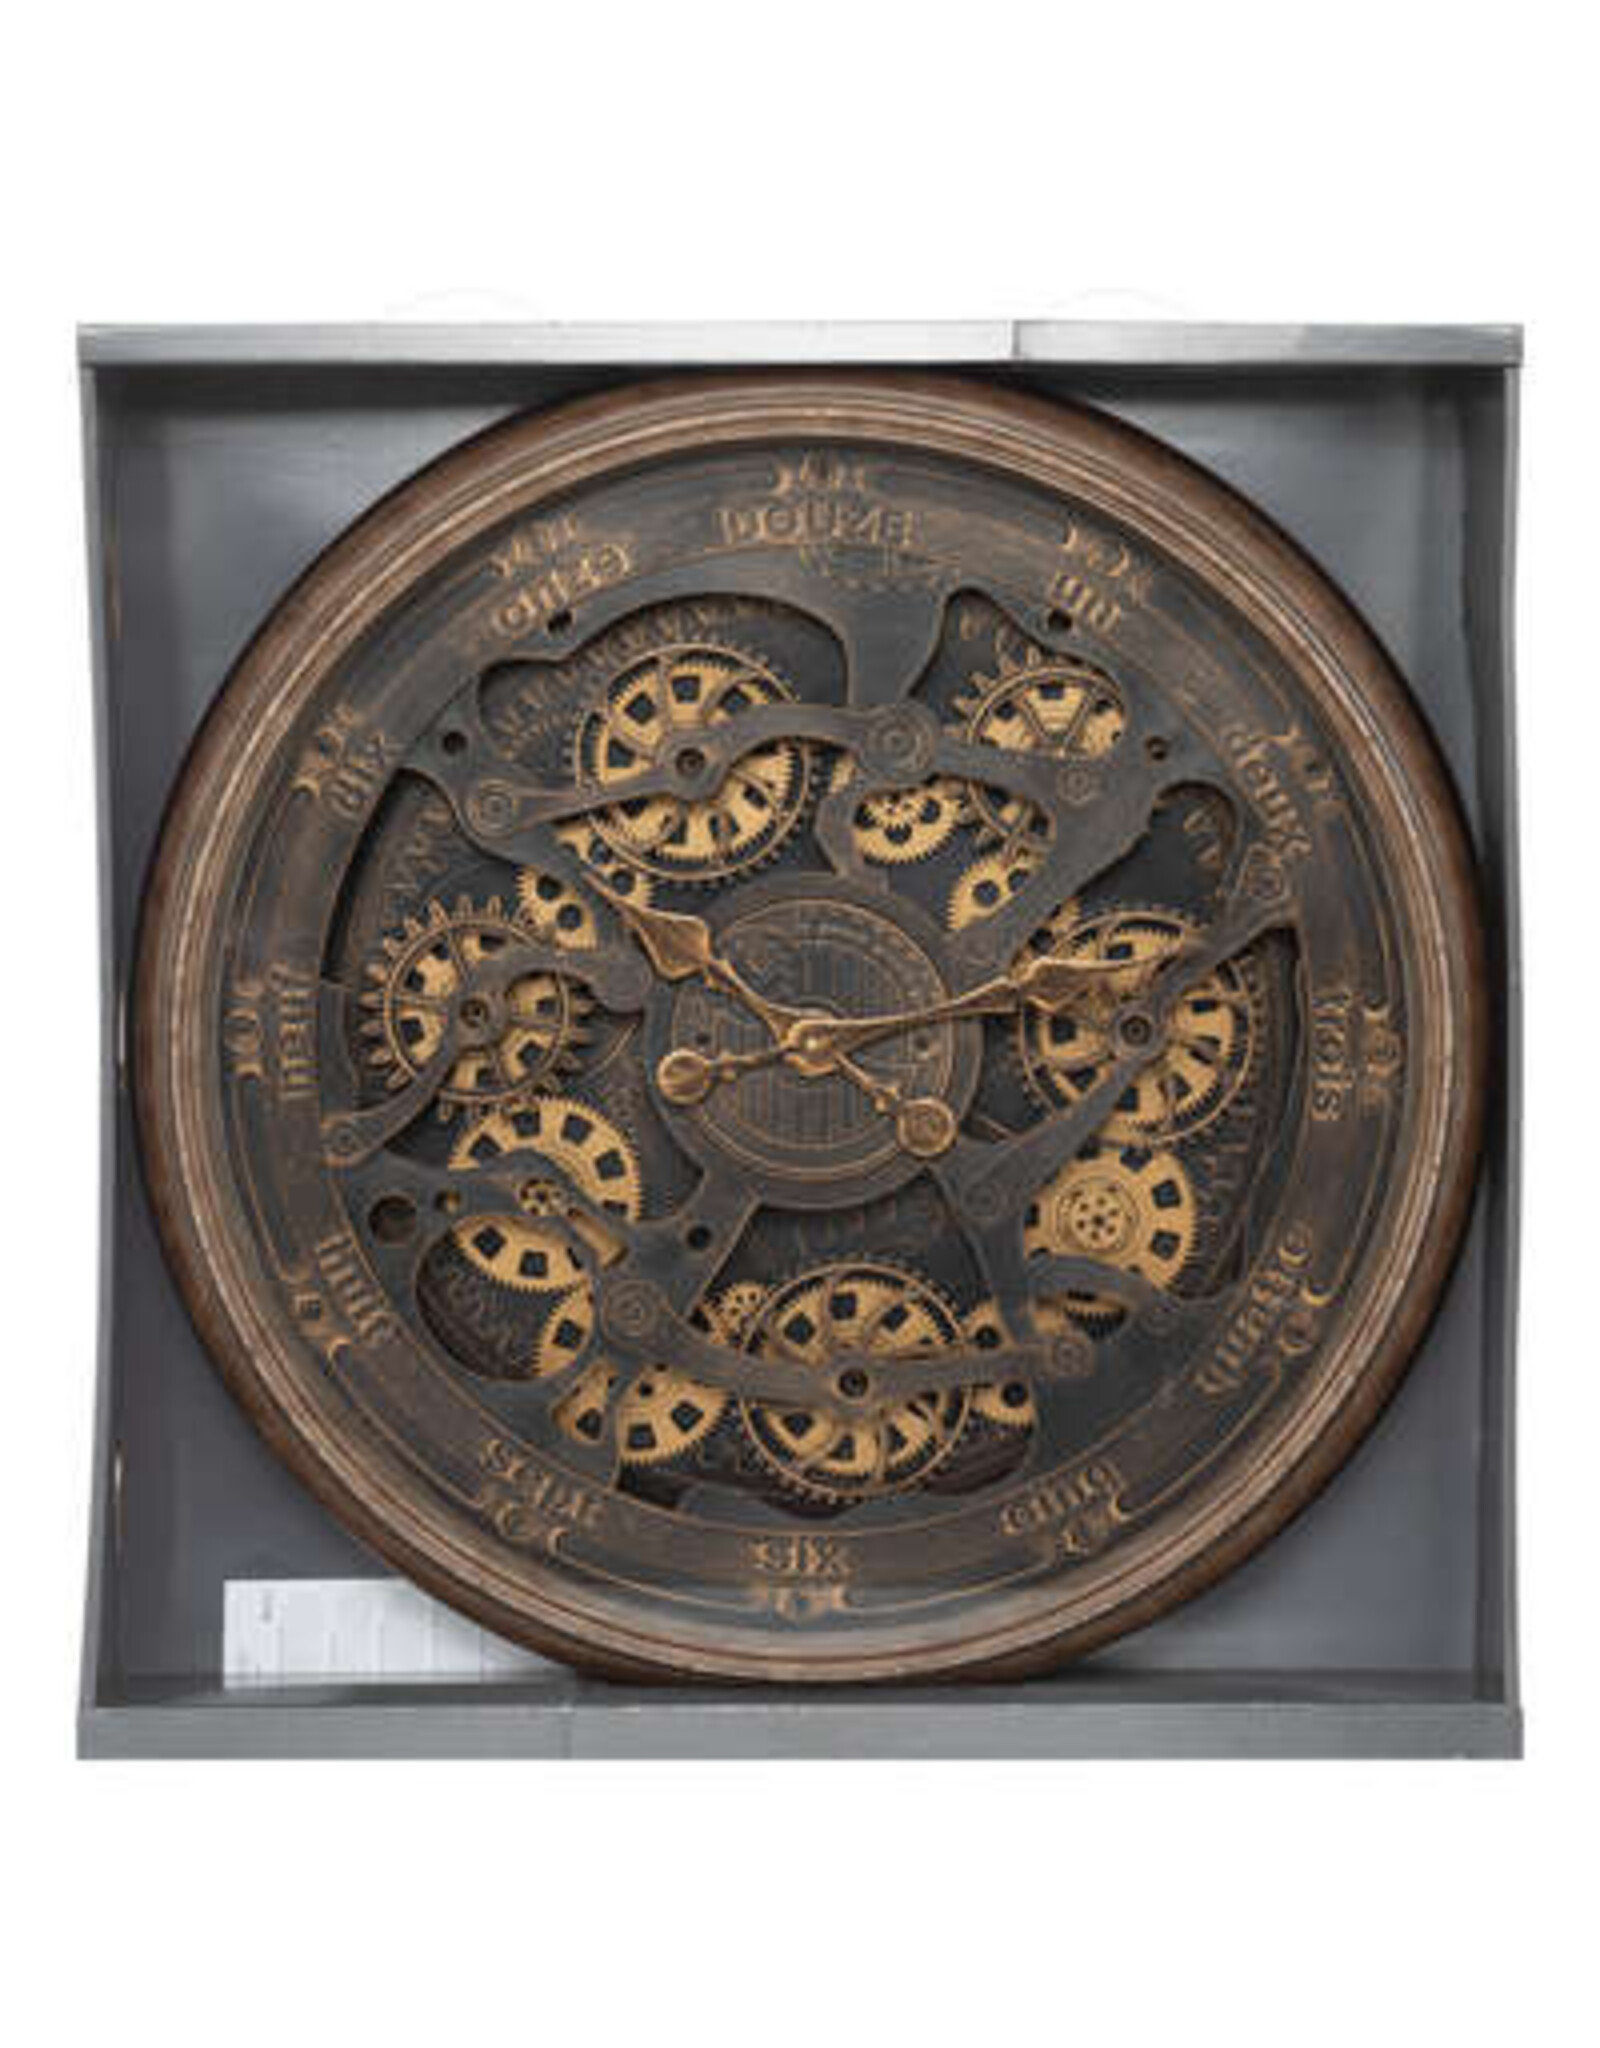 Trukado Miscellaneous - Wall clock with visible and moving cogs 76cm